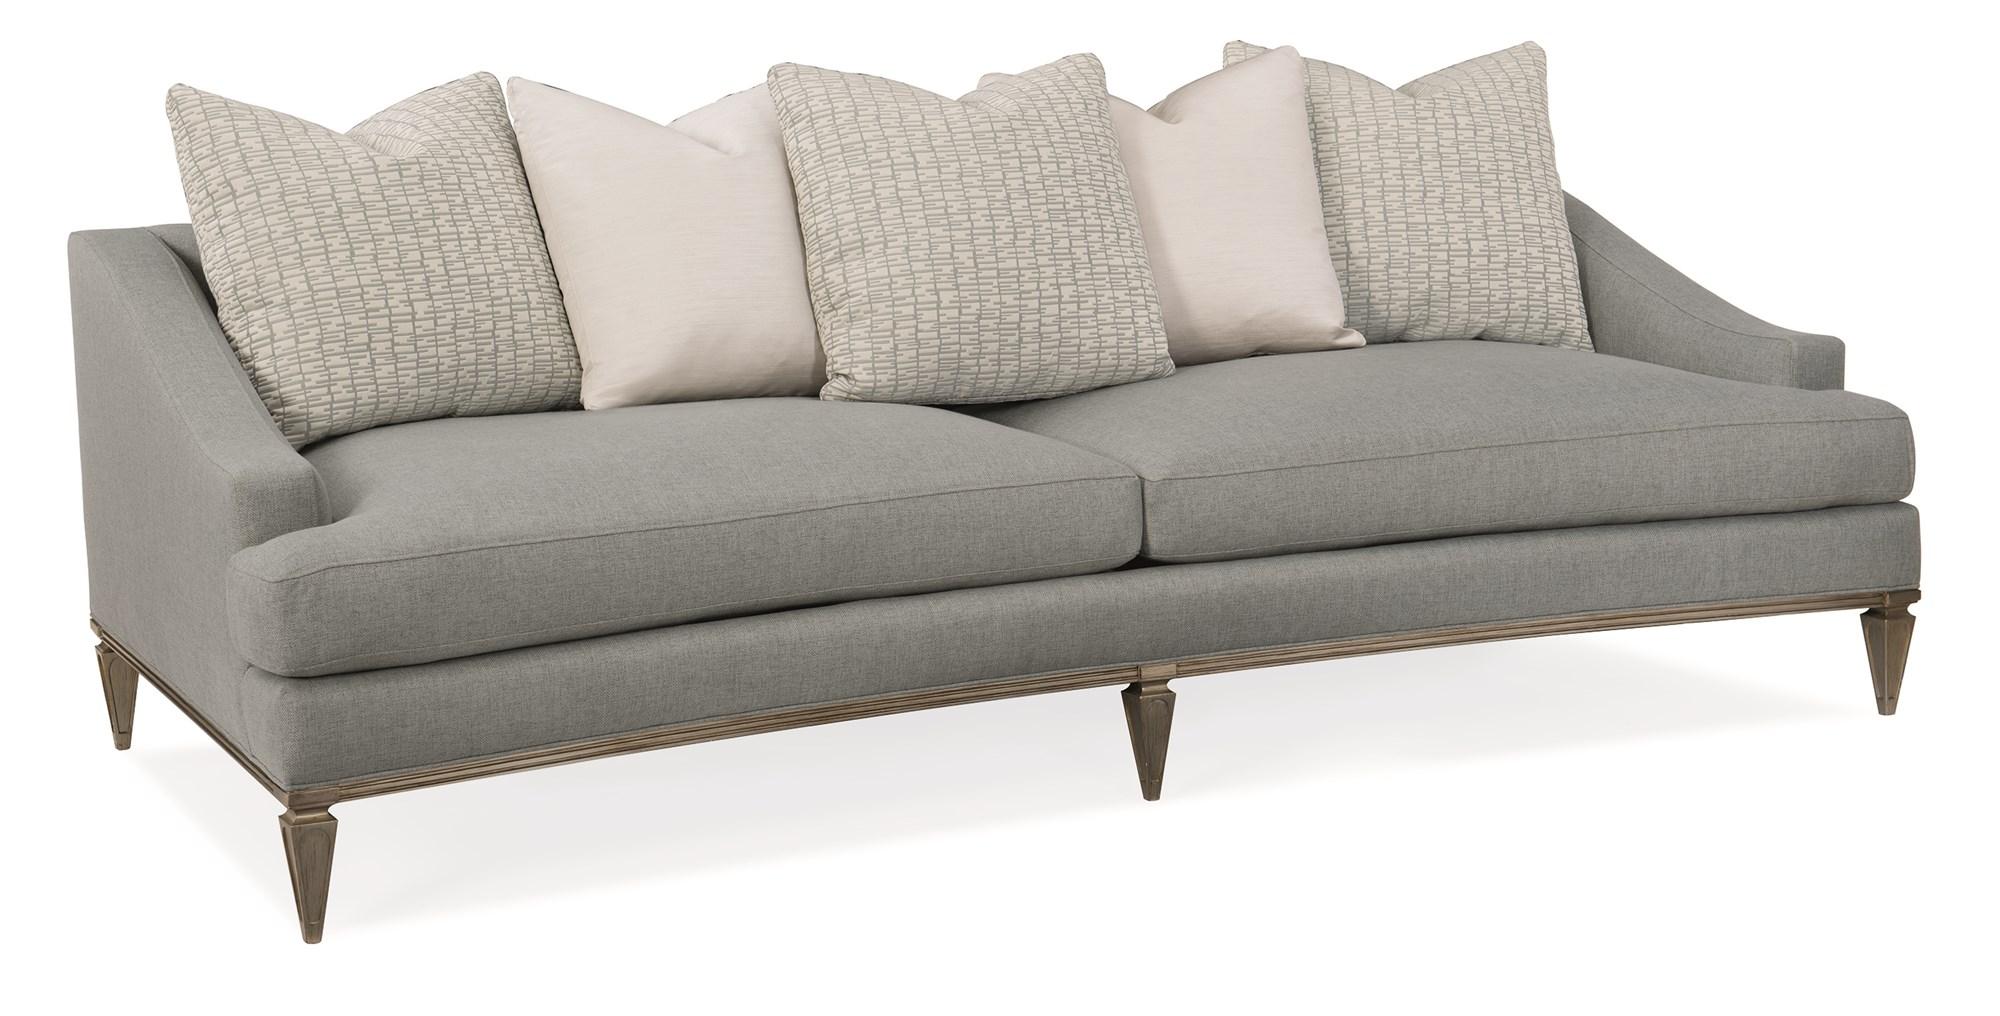 Contemporary Sofa LOW KEY UPH-418-011-A in Taupe, Gray Fabric